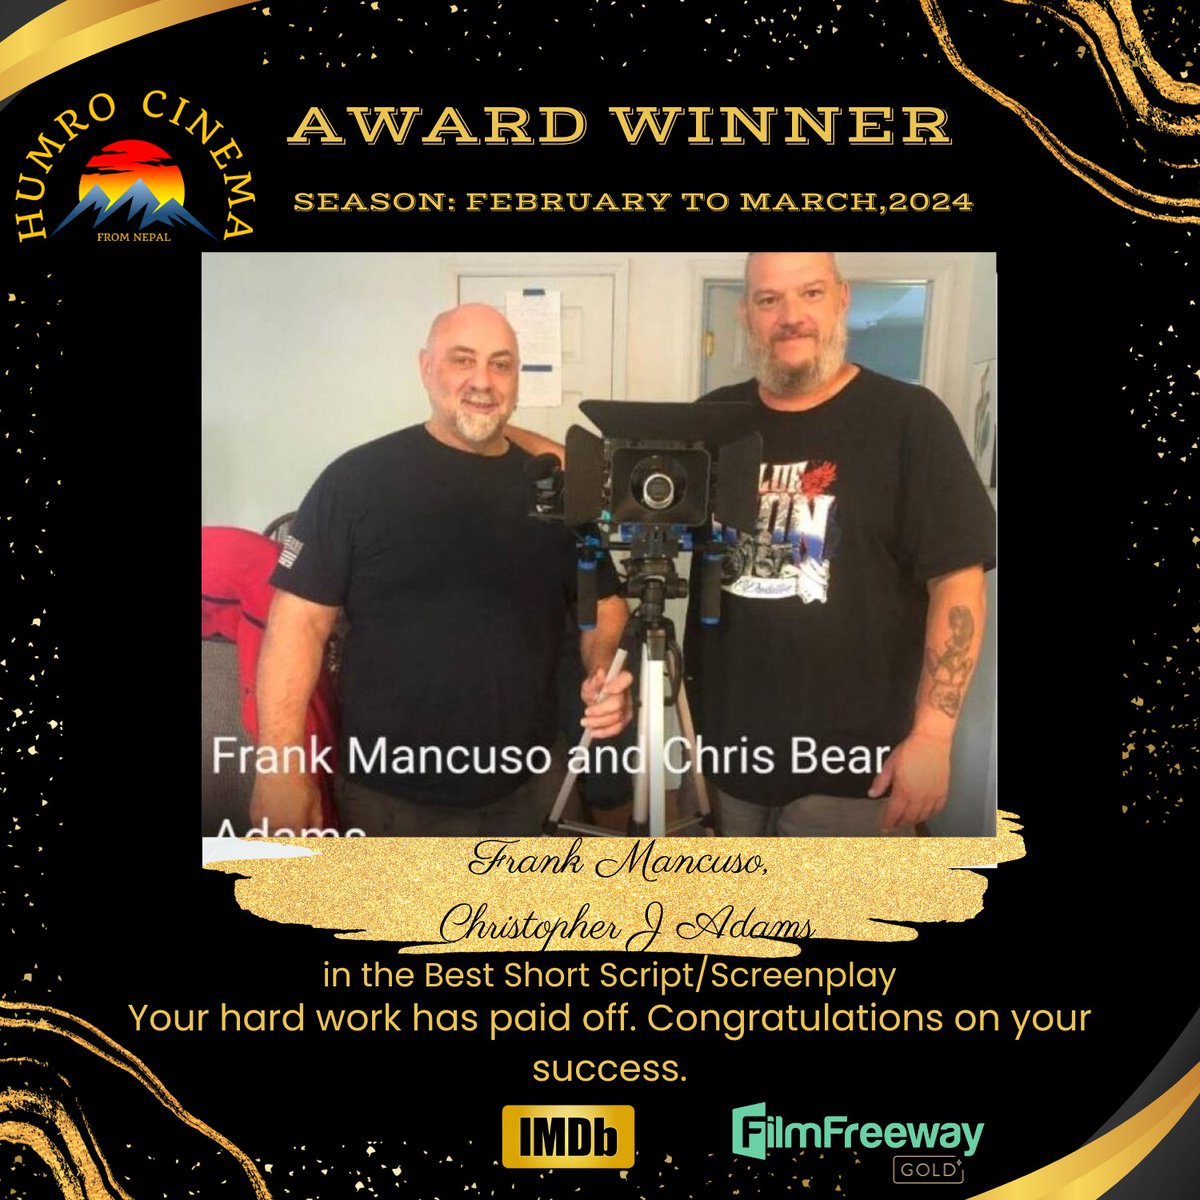 'AWARD WINNER SEASON FEBURARY TO MARCH 2024'. Script Name:WOLF STREET Writer Name:Frank Mancuso, Christopher J Adams Category: Best Short Script/Screenplay We extend our Warmest congratulations to all the winners on this remarkable achievement. Team Humro Cinema film festival